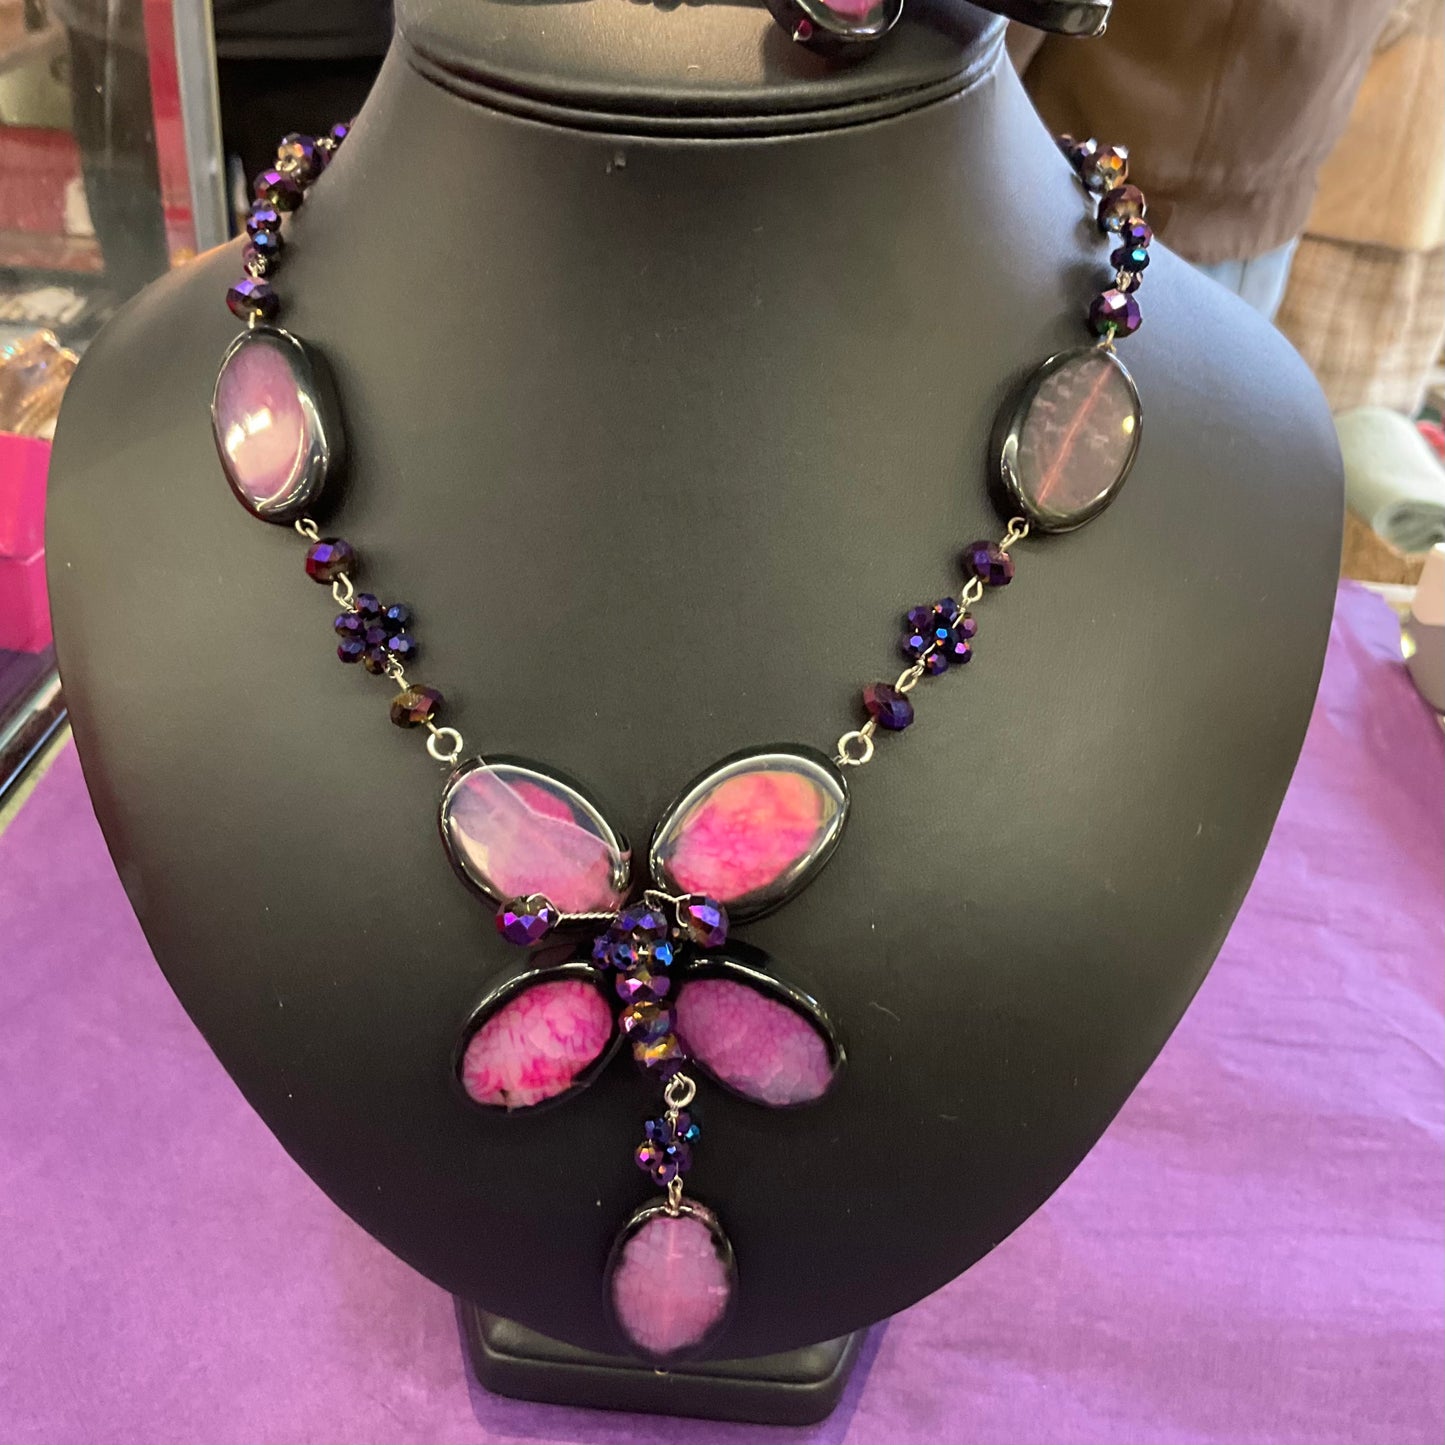 Vintage Butler and Wilson polished gemstone and crystal purple and pink floral/butterfly necklace and bracelet set